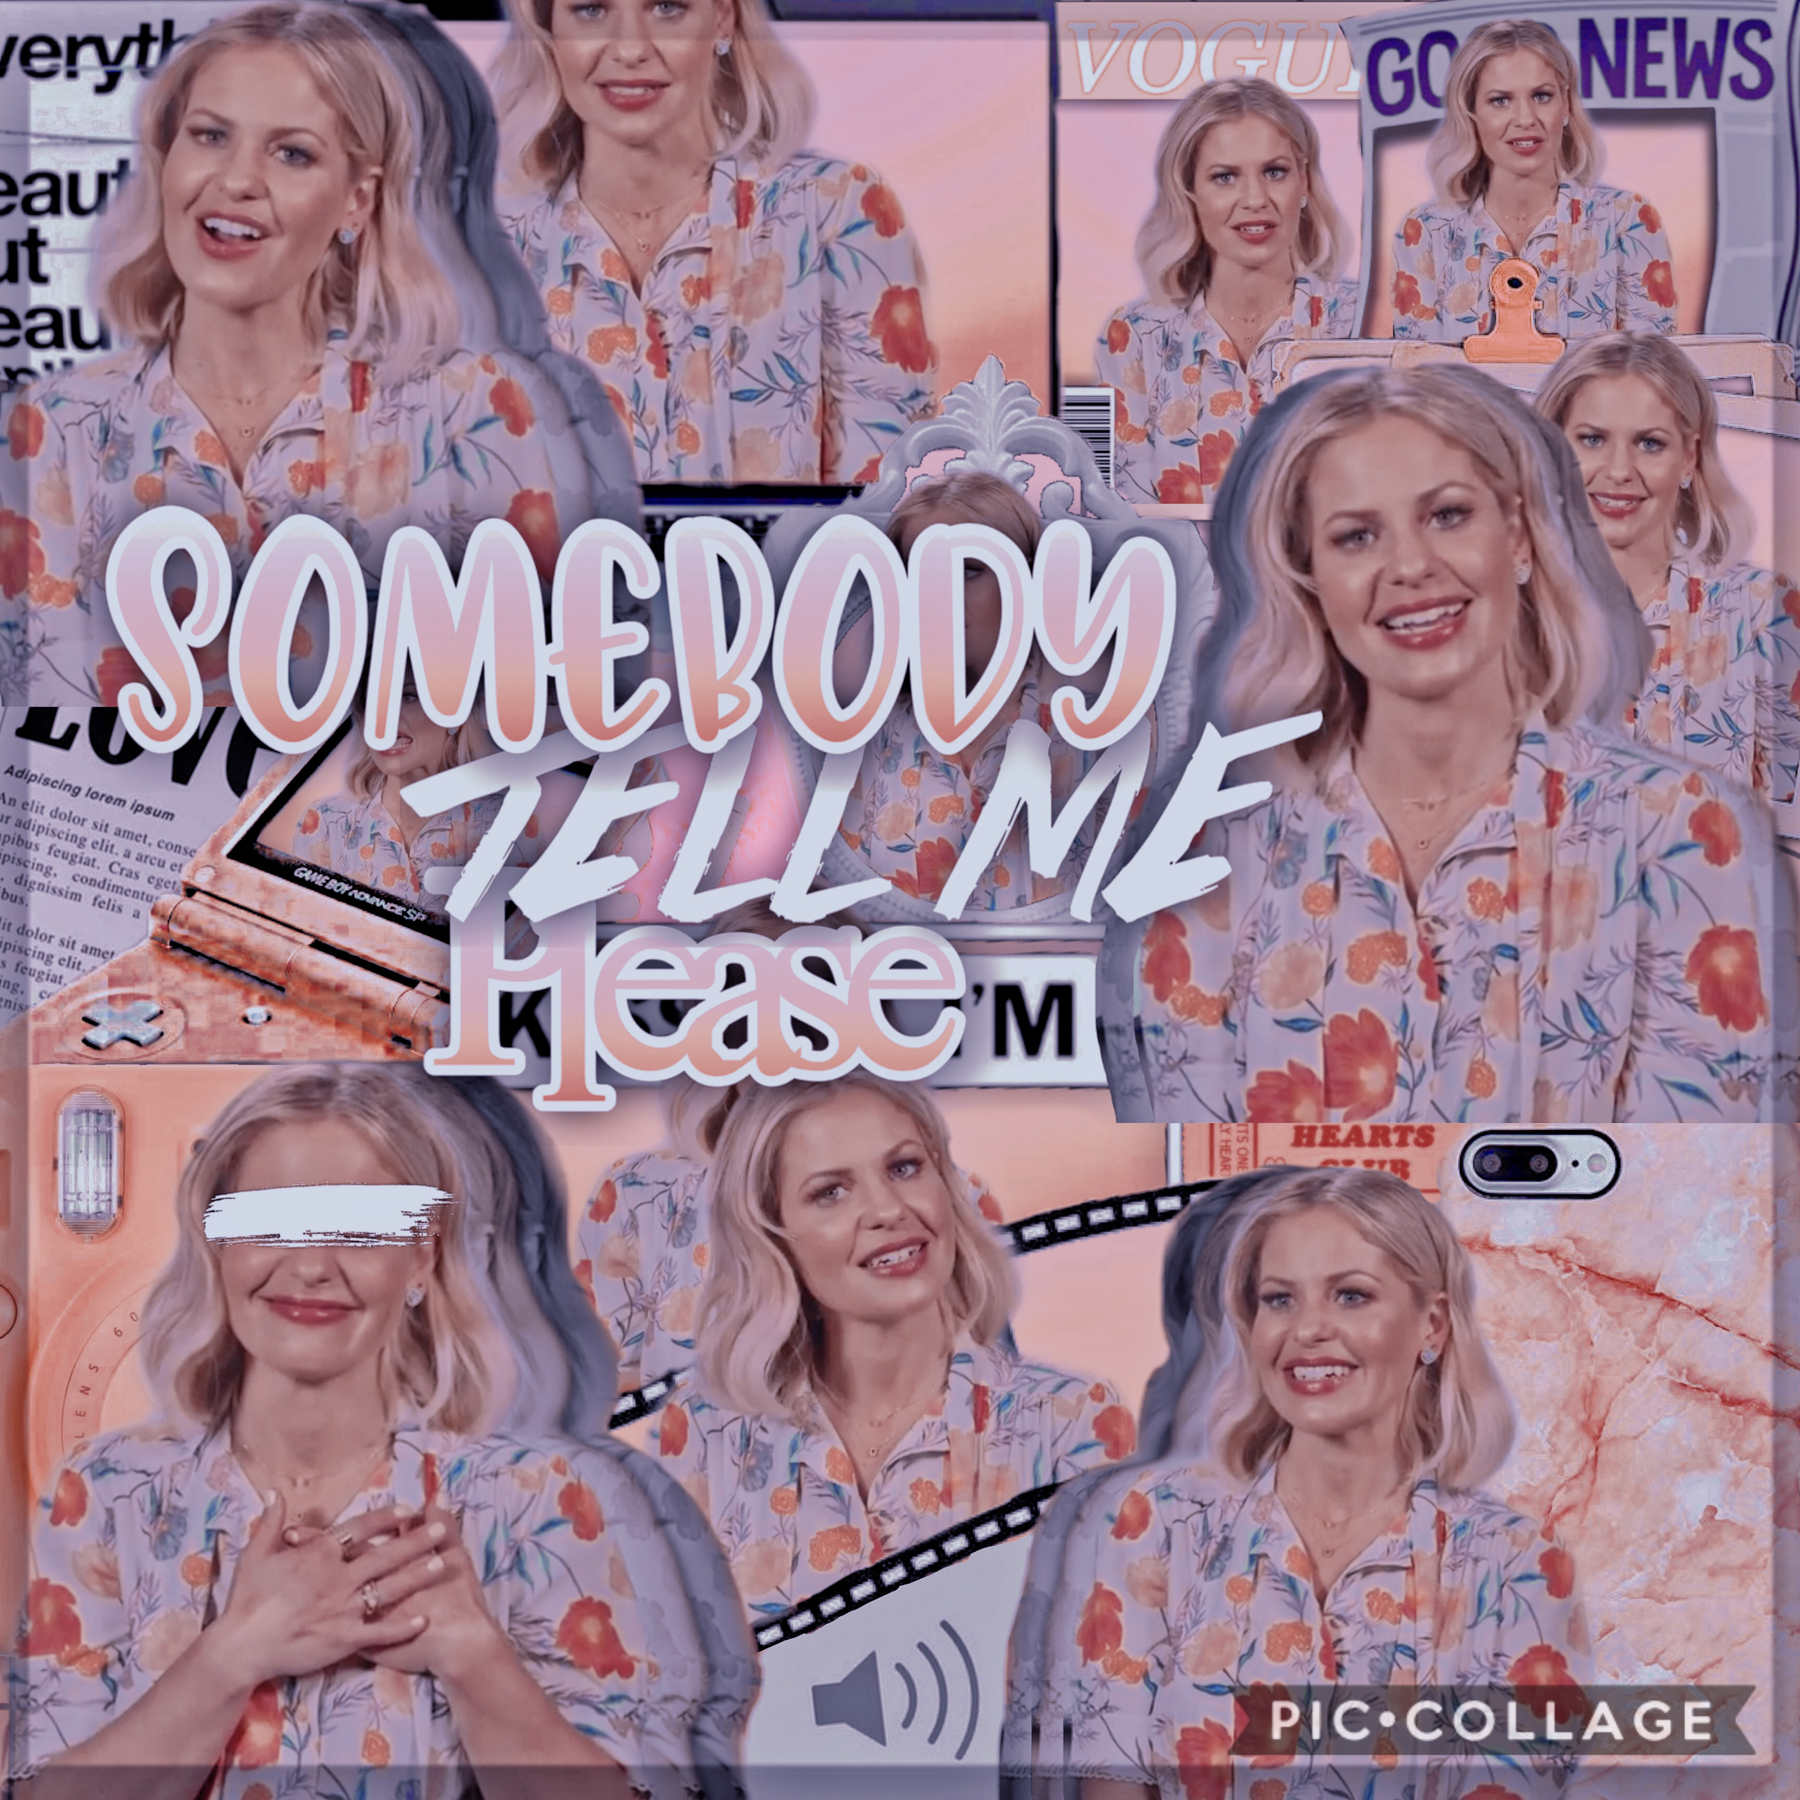 New edit!!! Did you guys watch Fuller house if not u should watch it it’s amazing!!